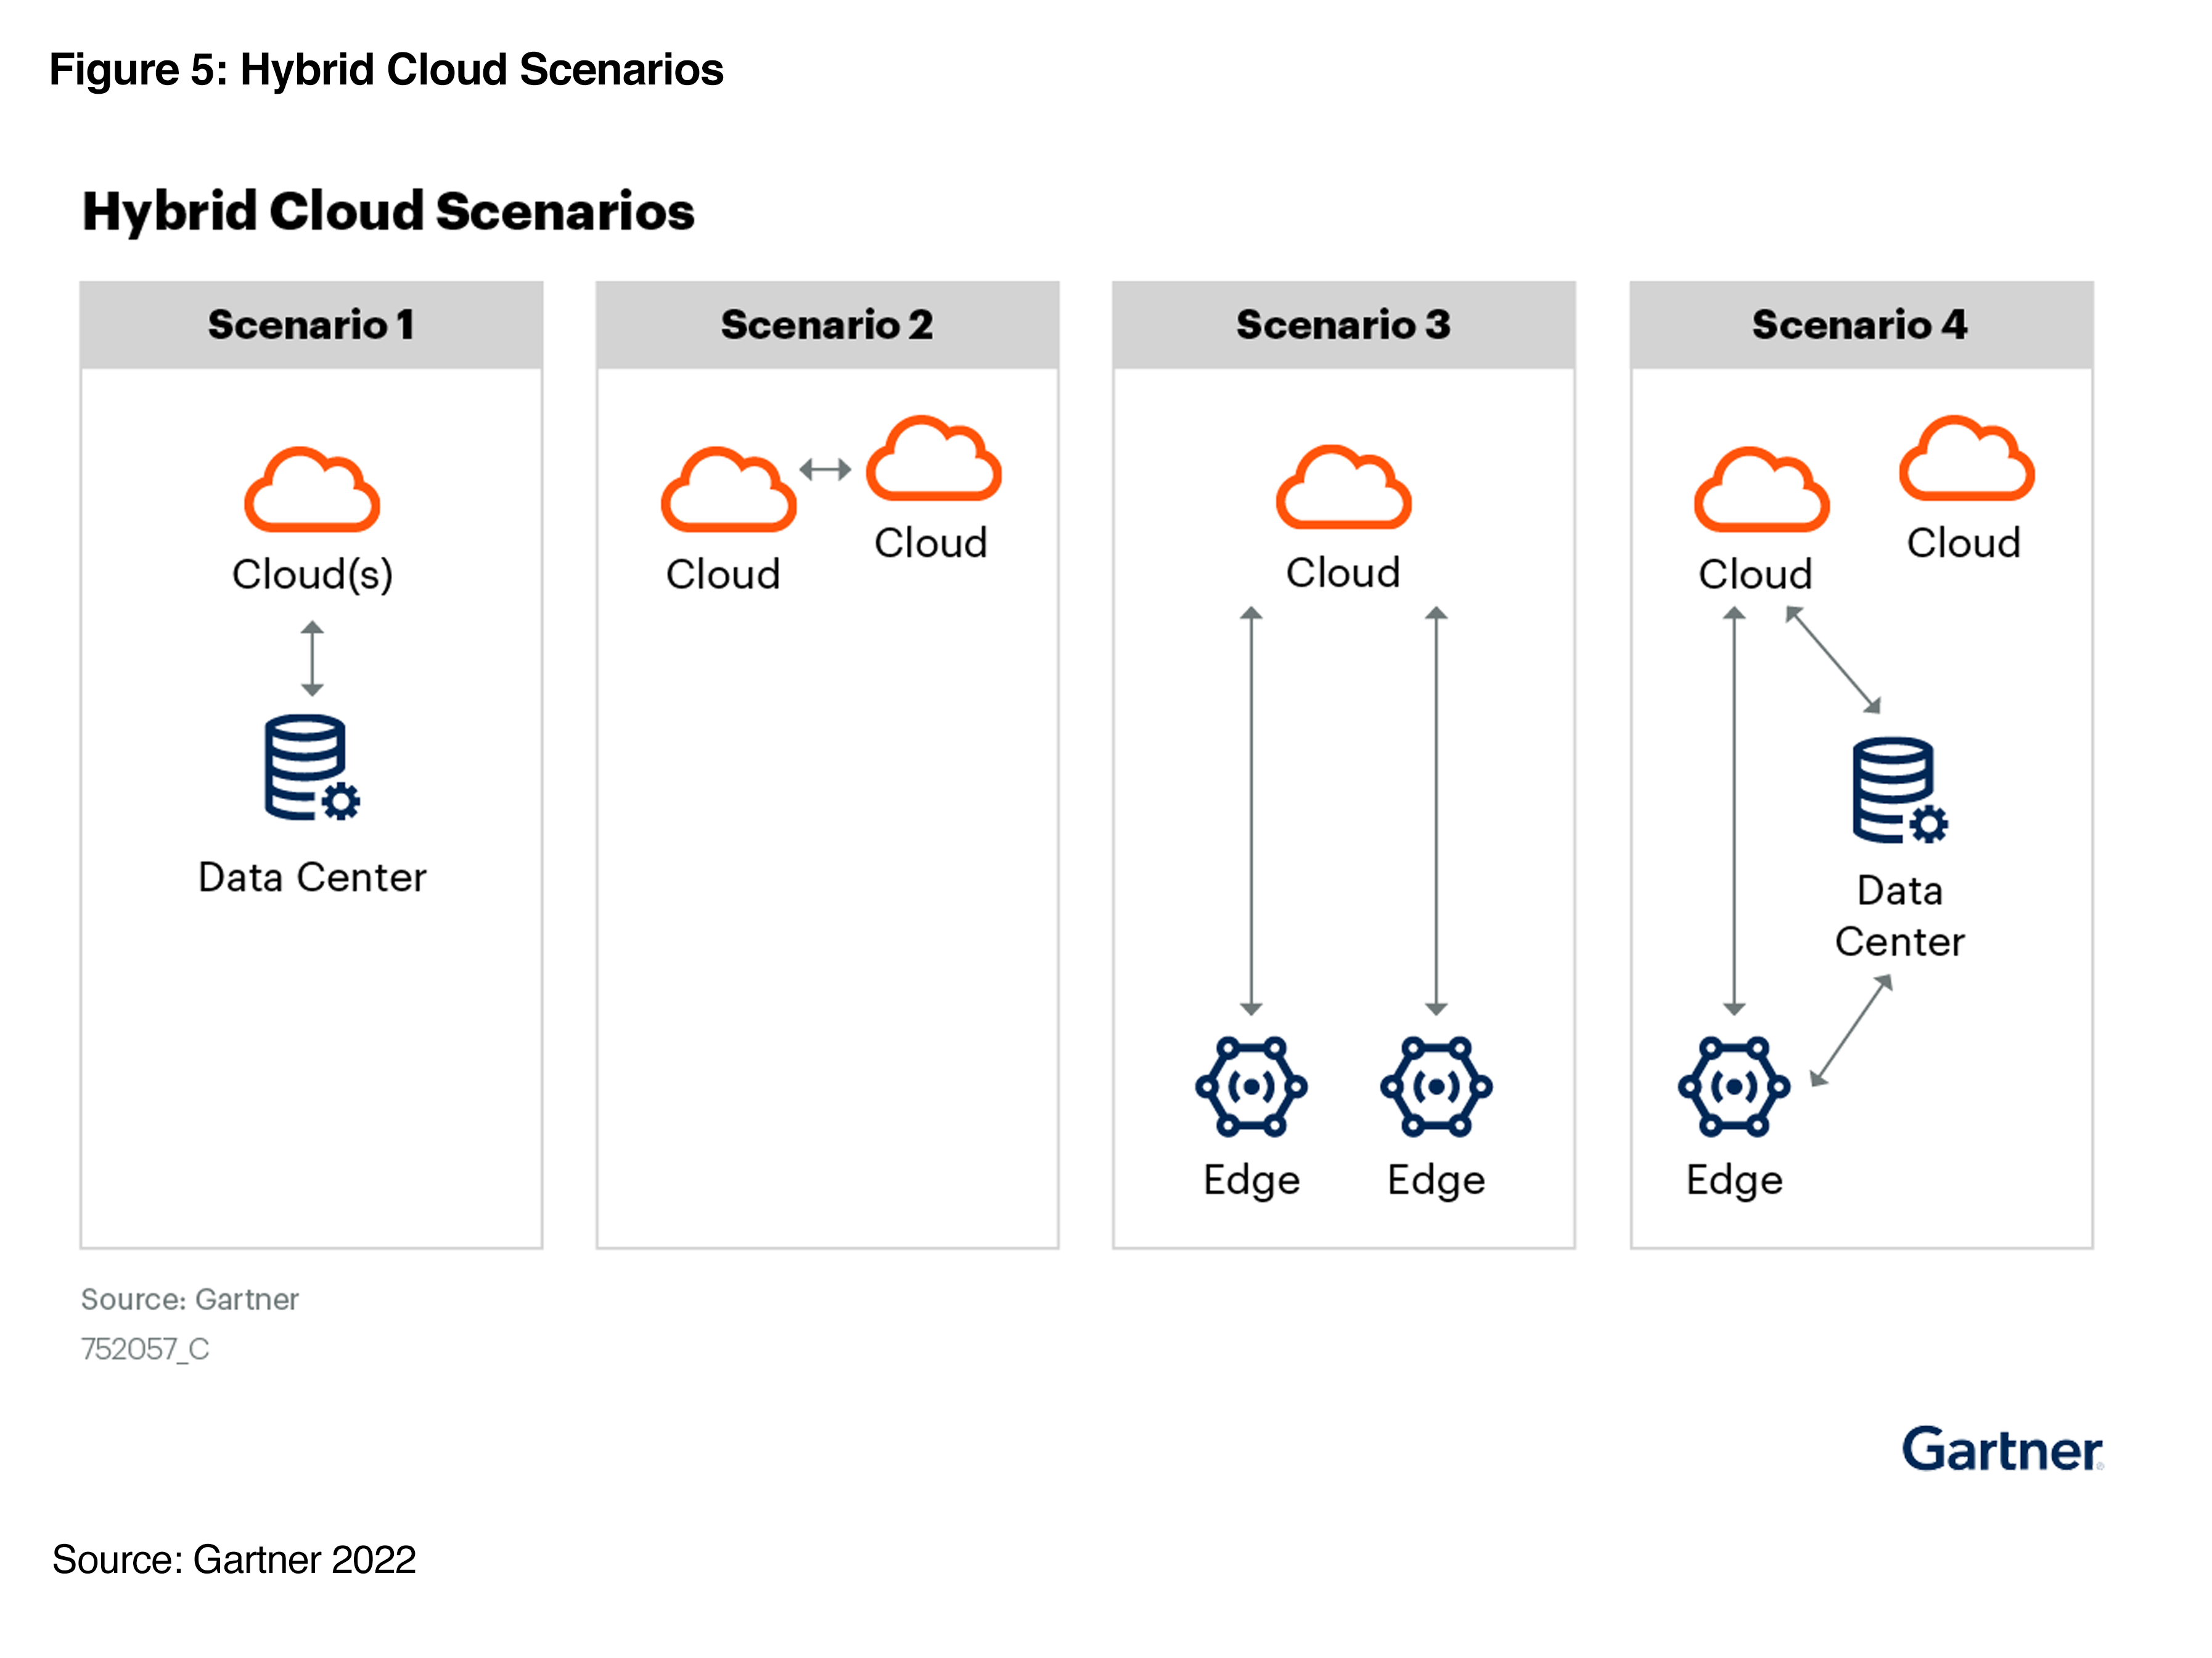 Modernize Your File Storage and Data Services for the Hybrid Cloud Future